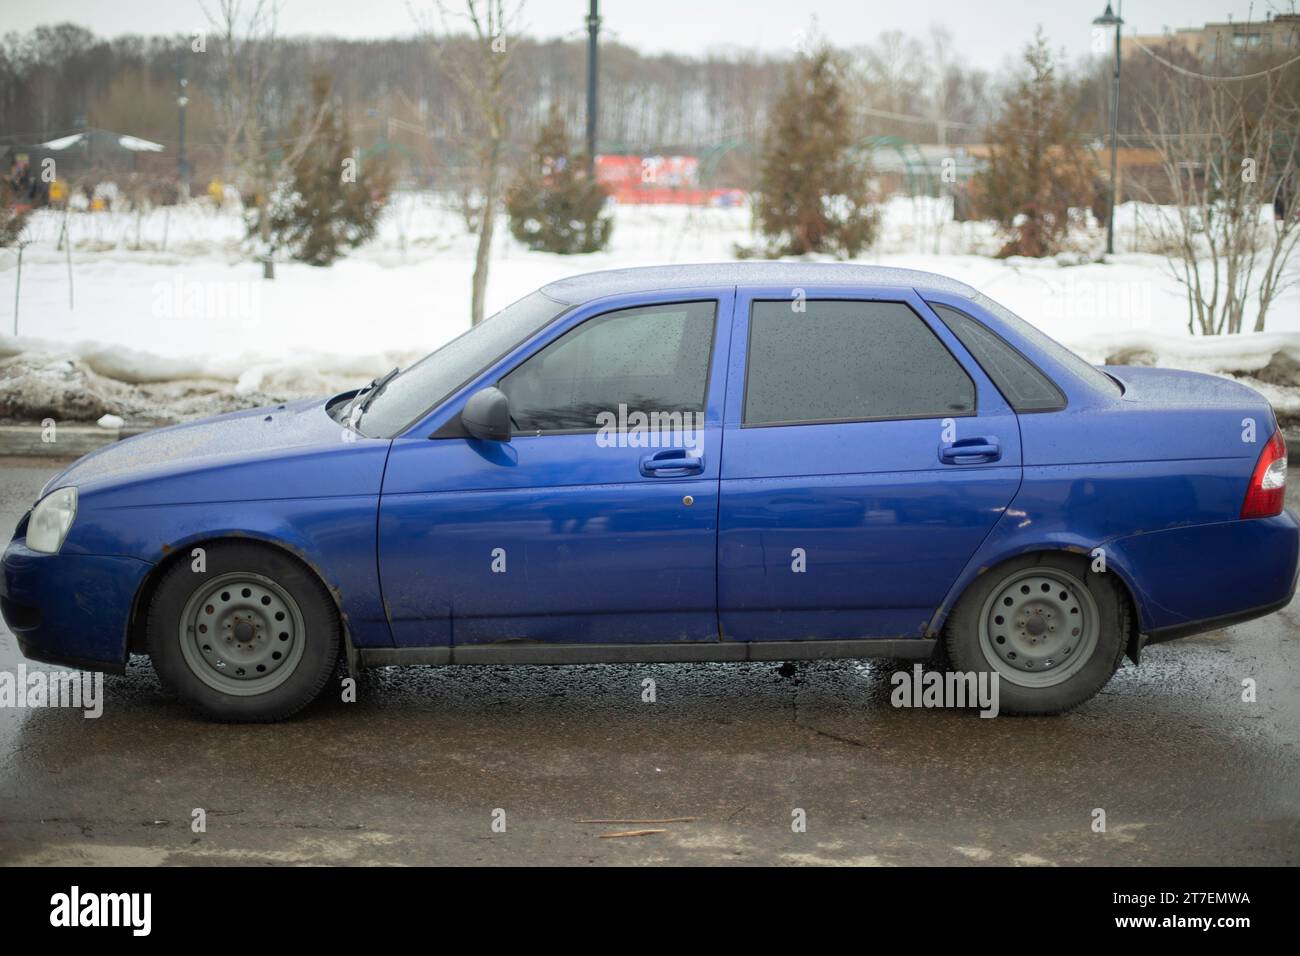 Blue car in winter. Russian car in parking lot. Blue transport with tinted windows. Car on background of snow. Stock Photo